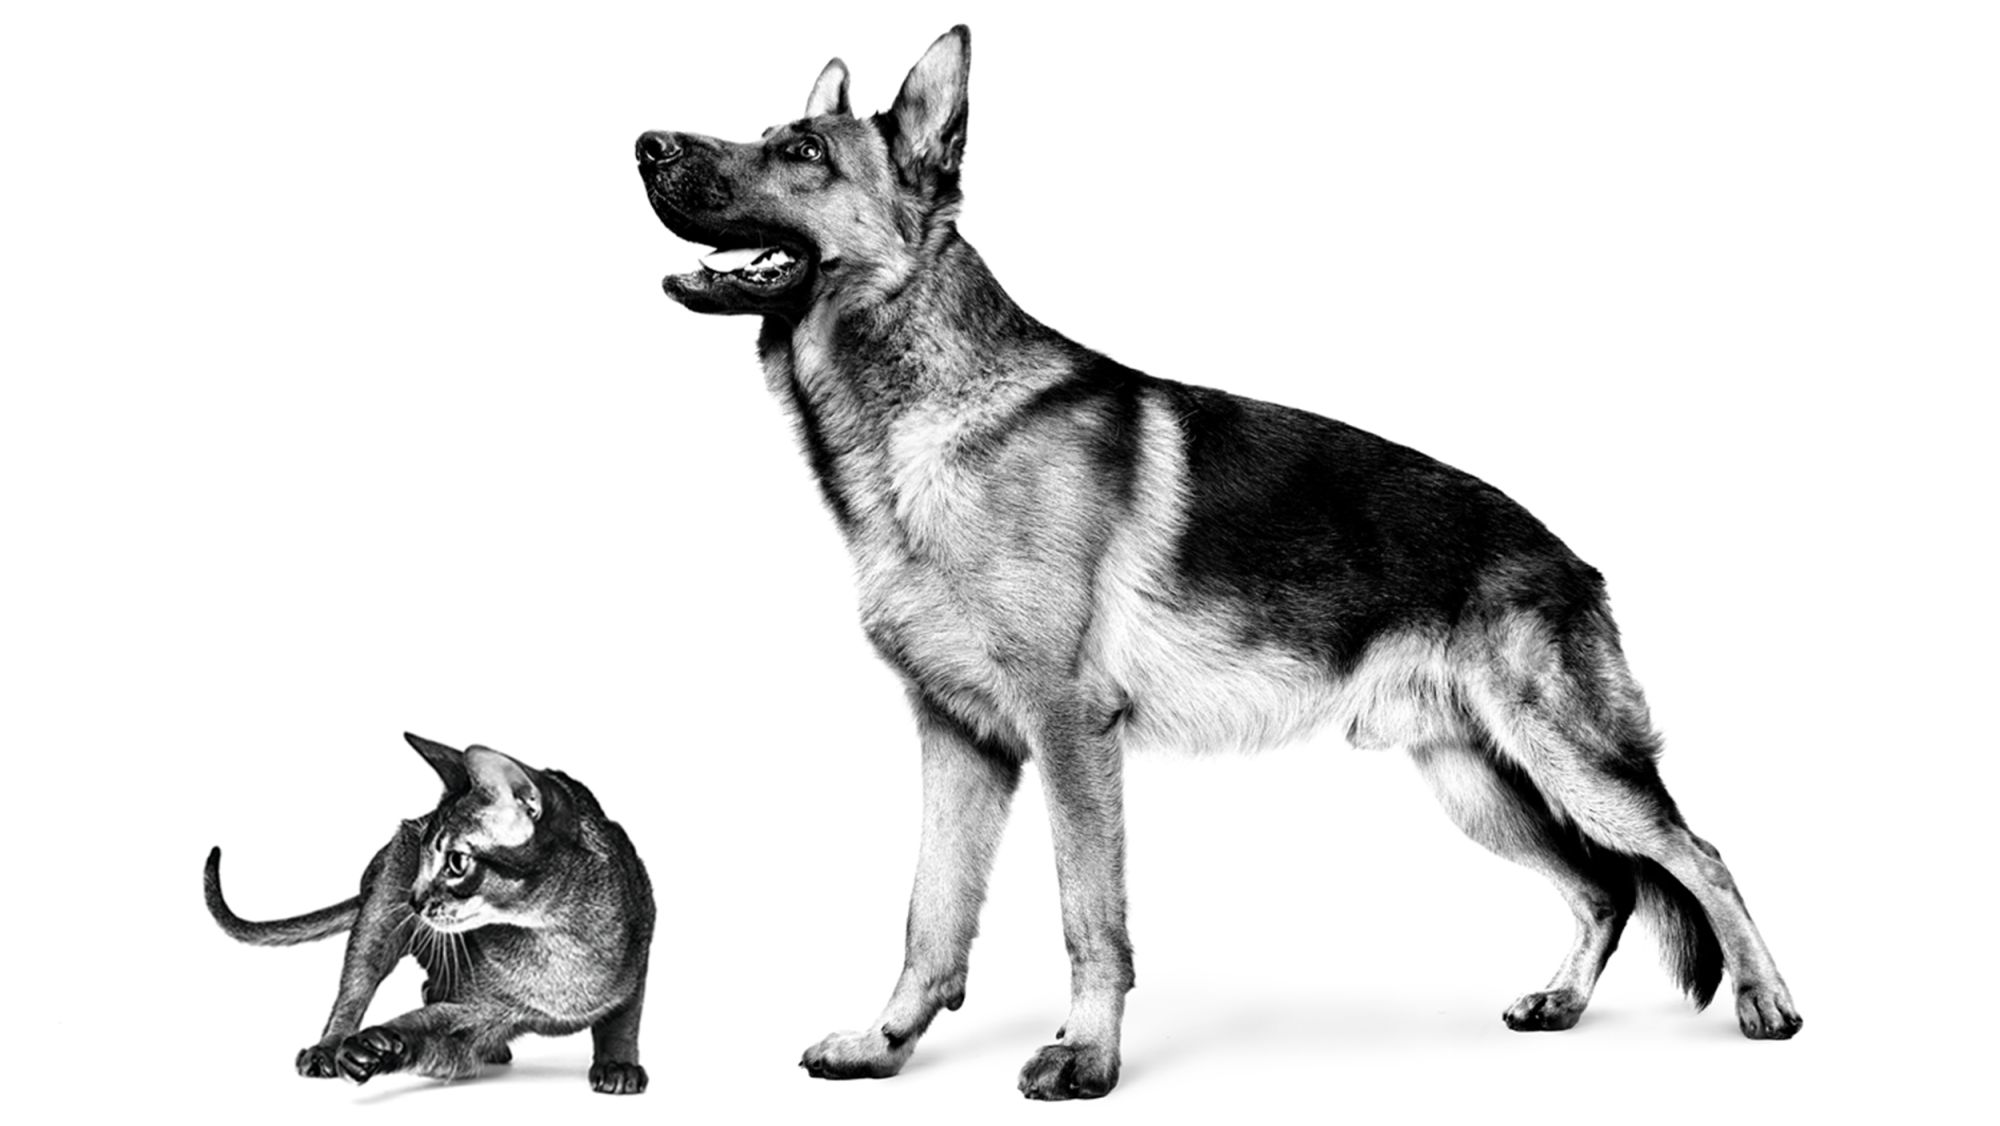 German shepherd and cat in black and white